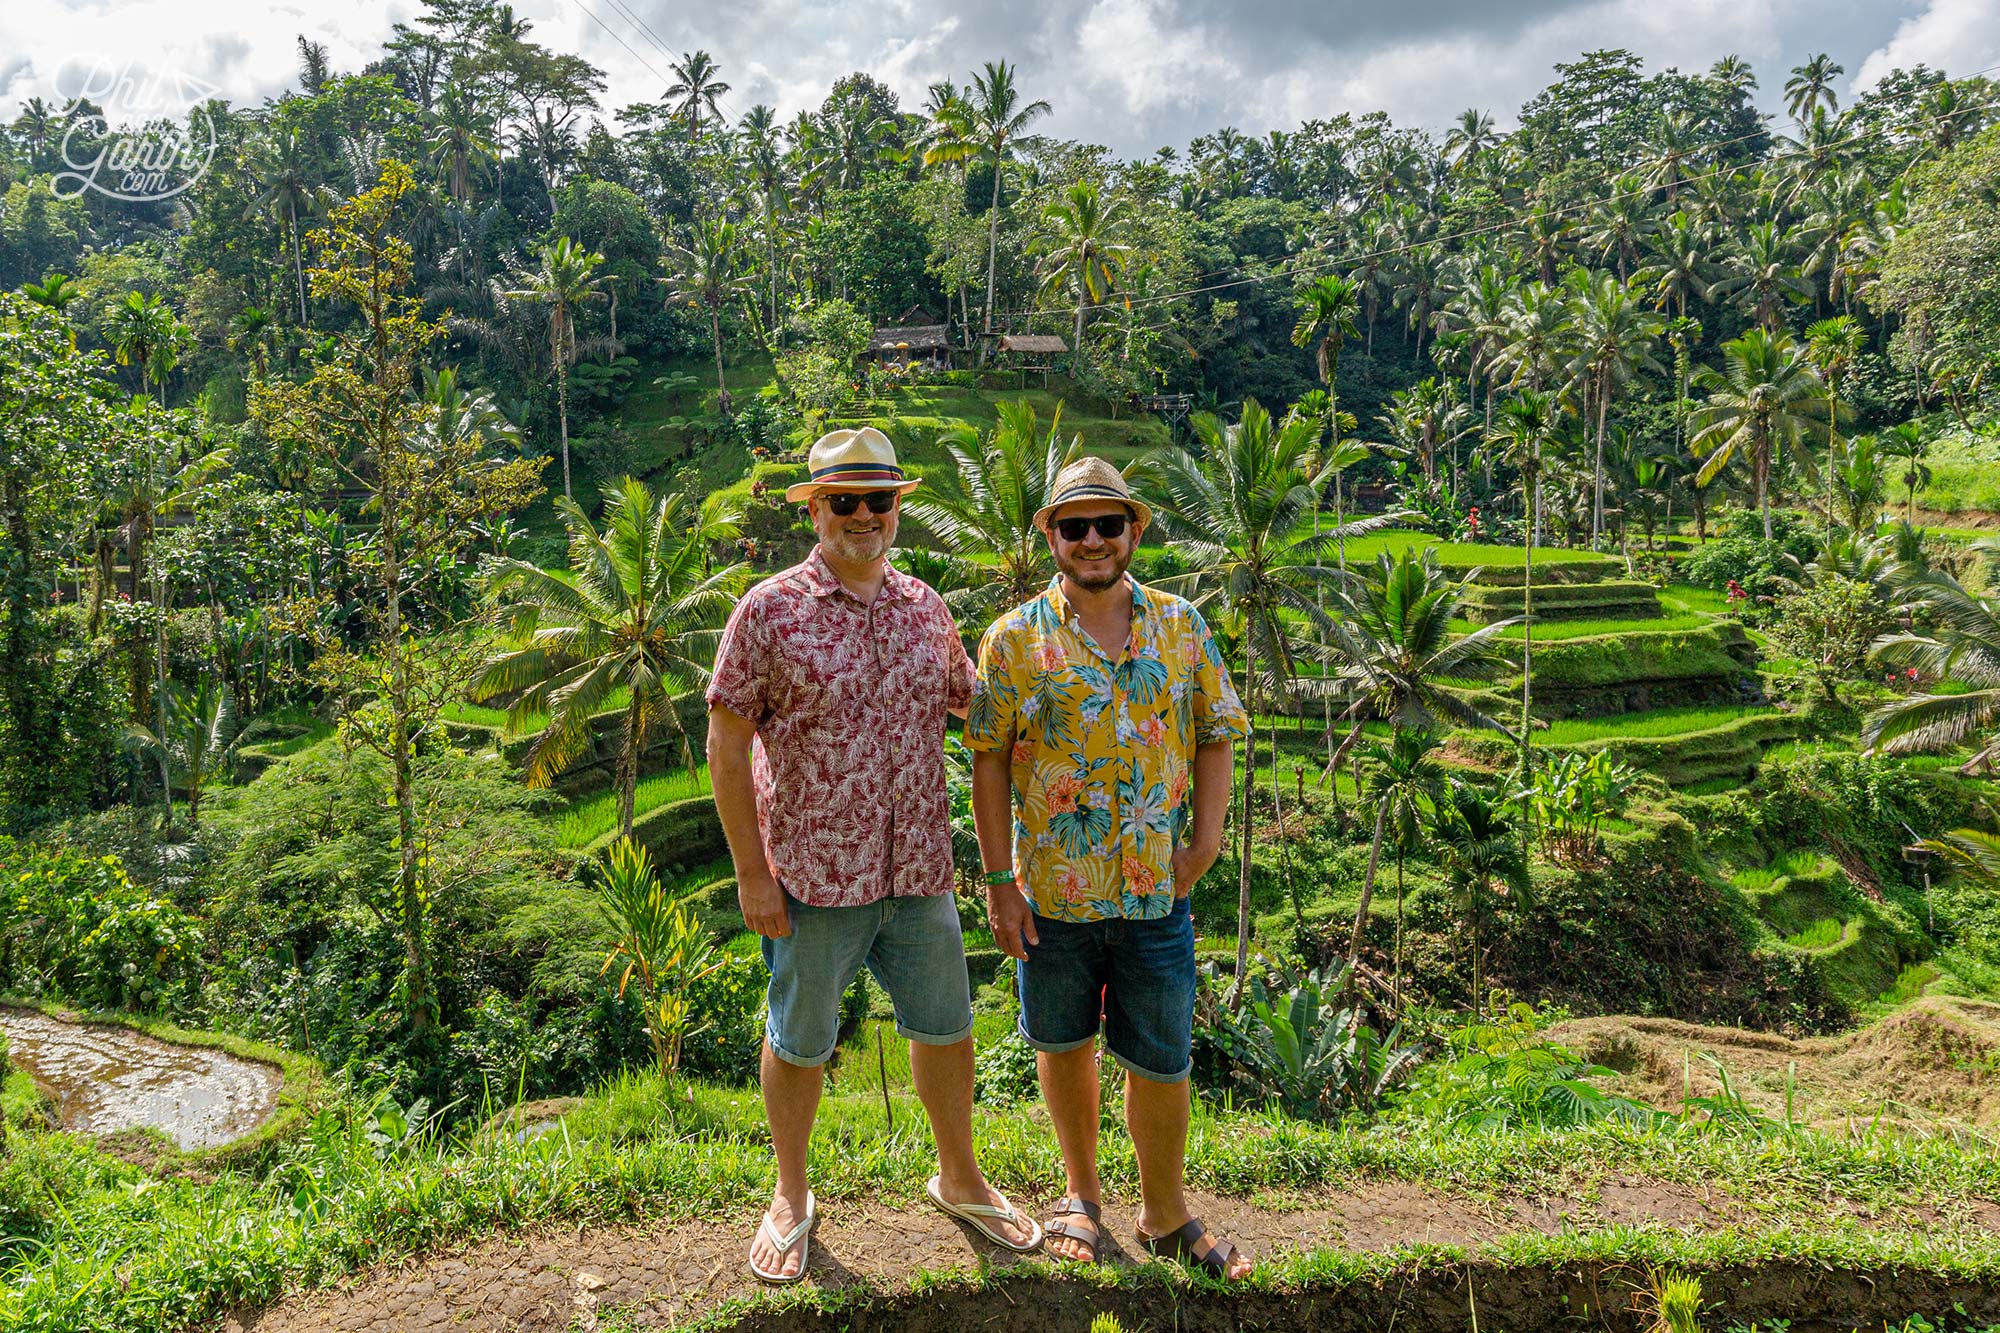 The Tegallalang Rice Terrace – Easily one of the most beautiful places in Bali